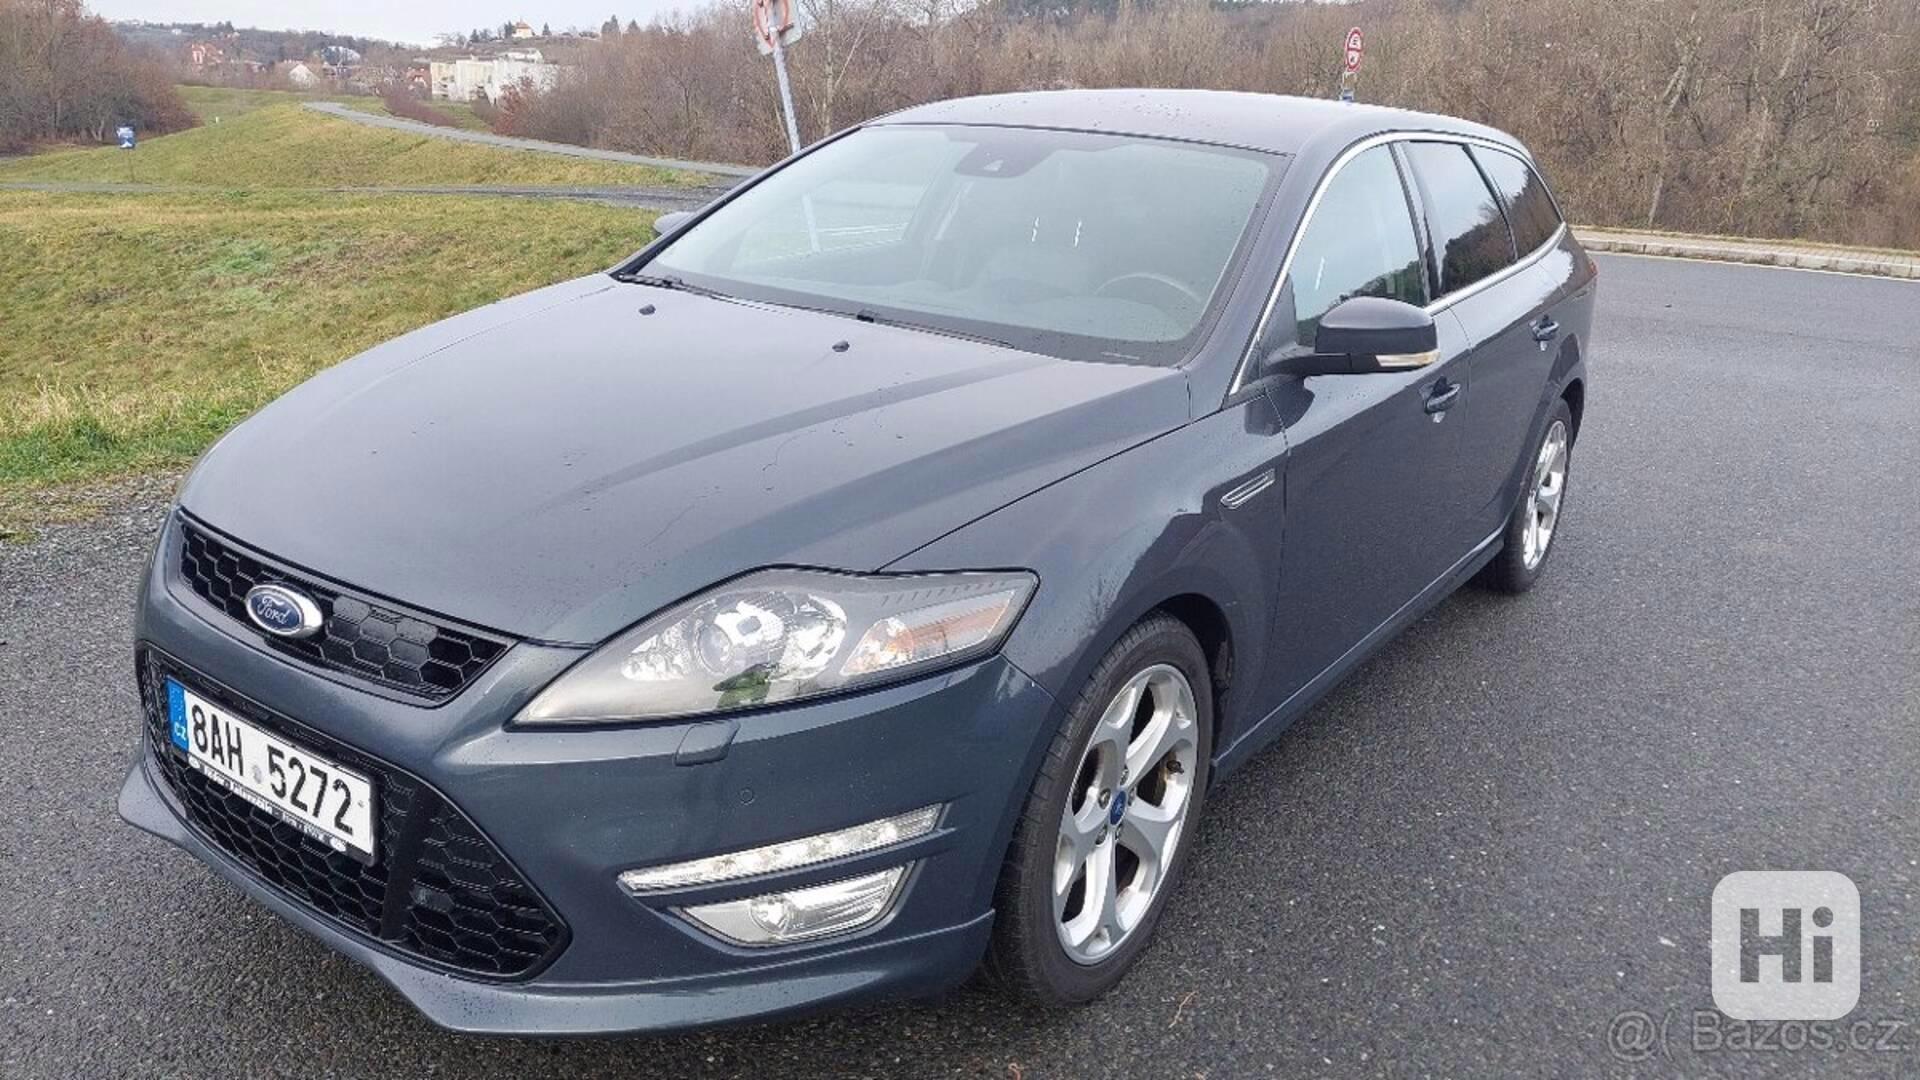 Ford Mondeo 2,2 147kW - foto 1